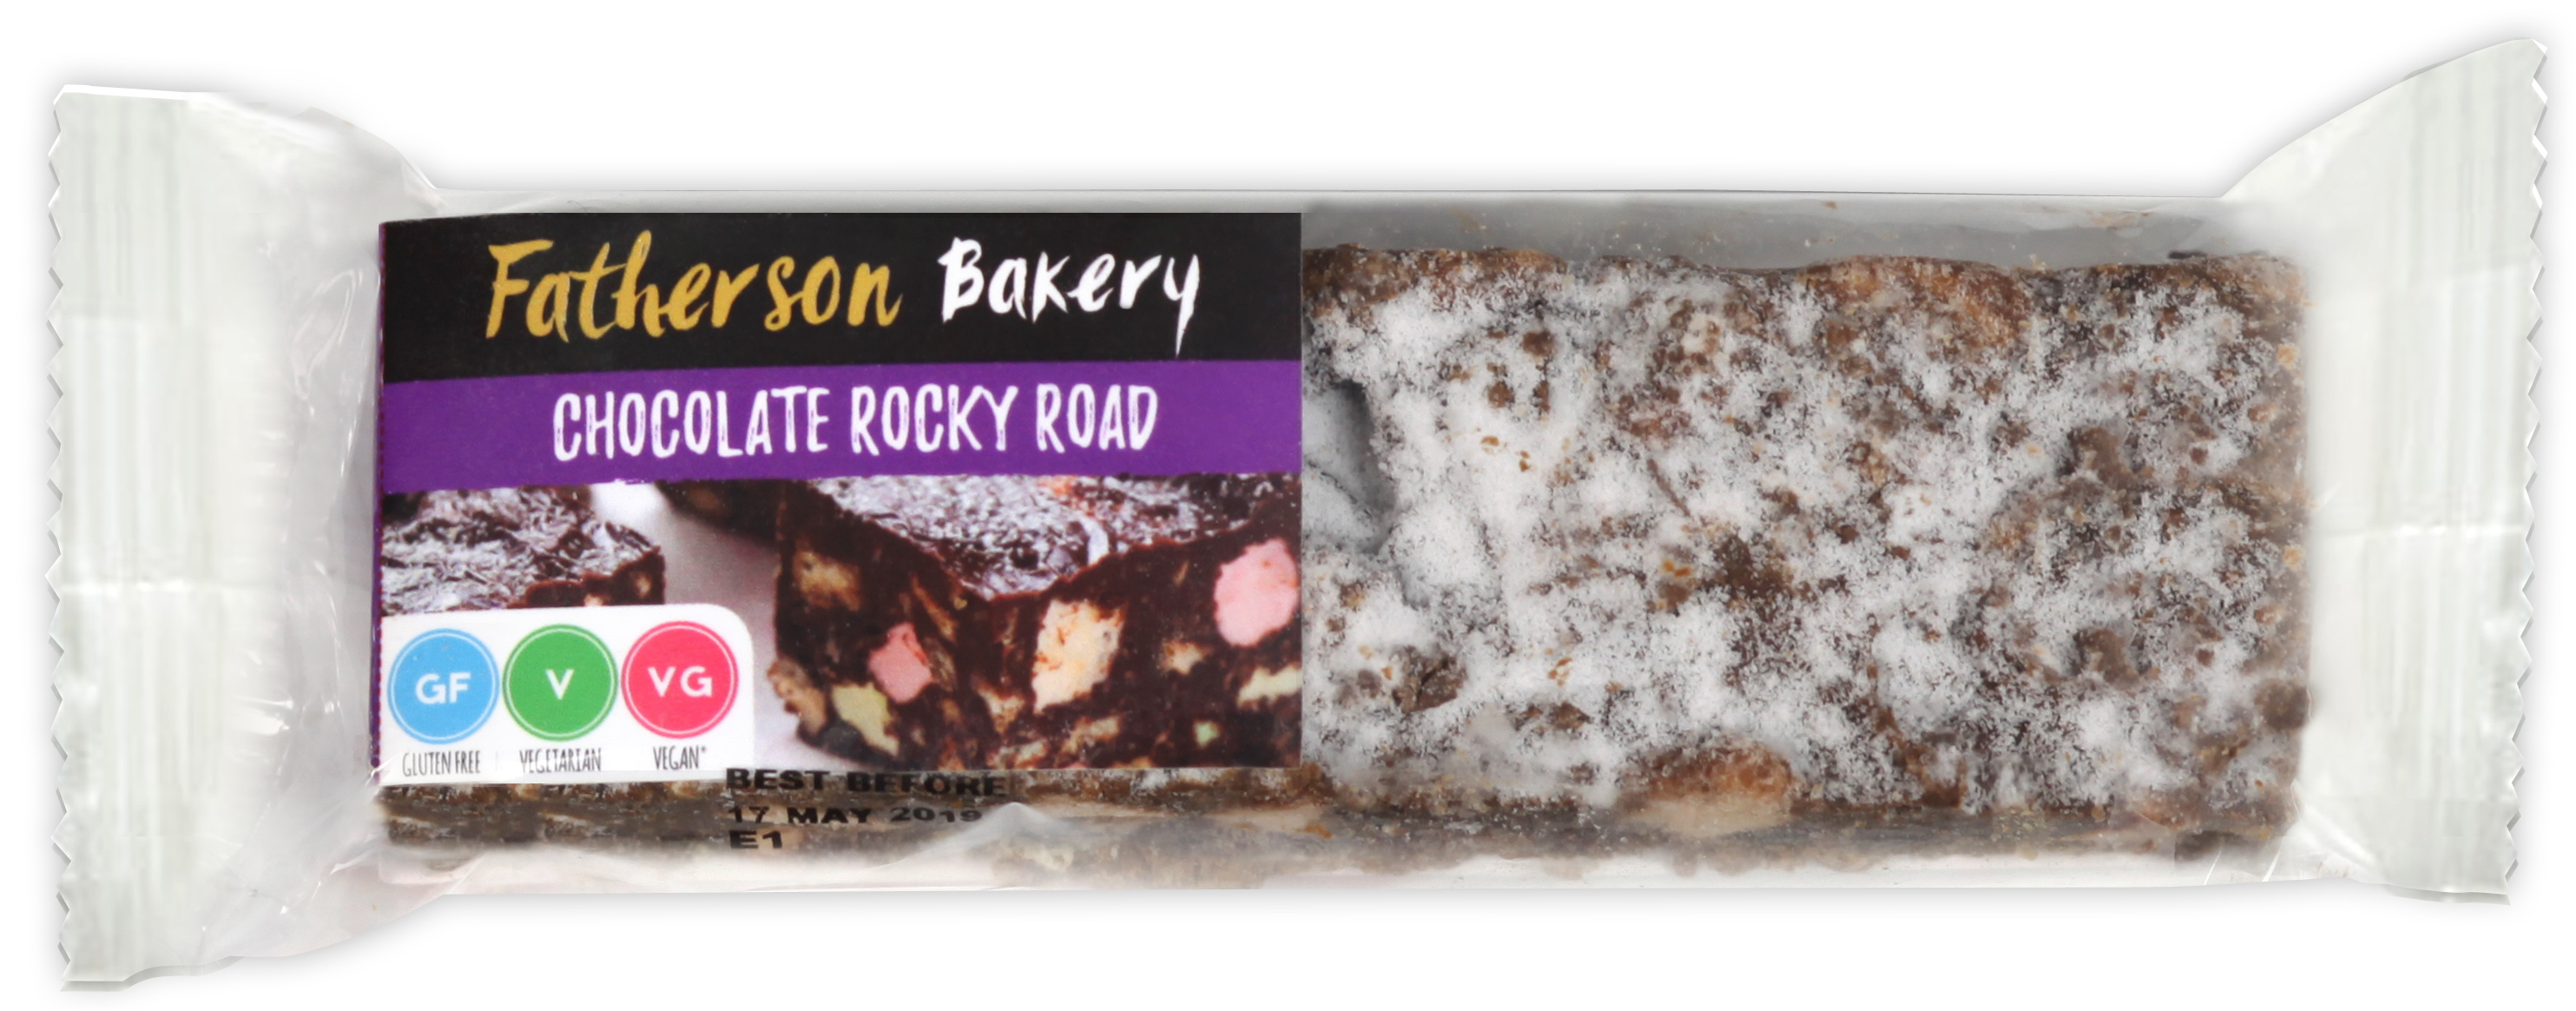 Fatherson Bakery launch new gluten-free snack bars